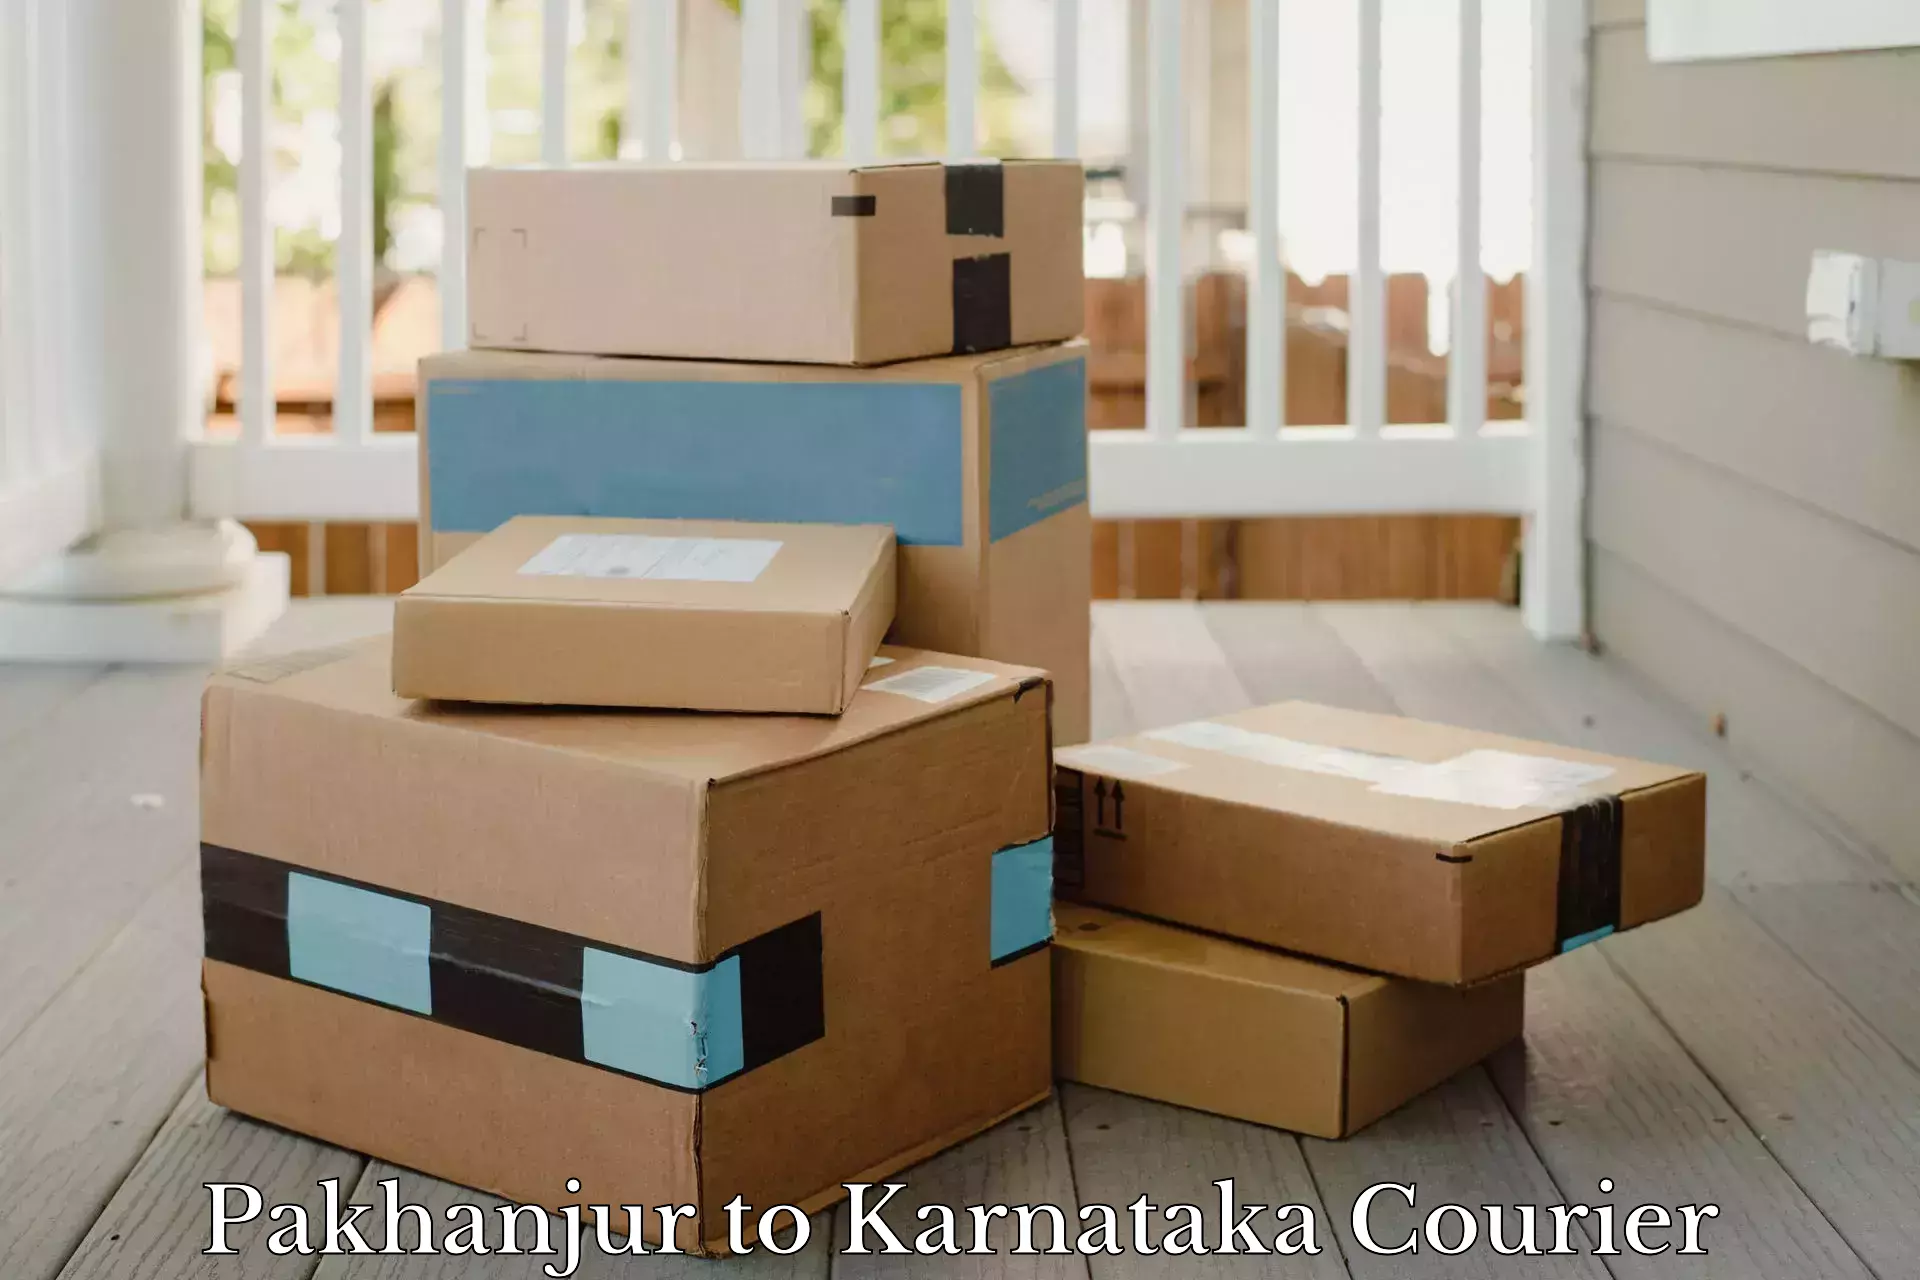 Courier service comparison in Pakhanjur to Pedapudi